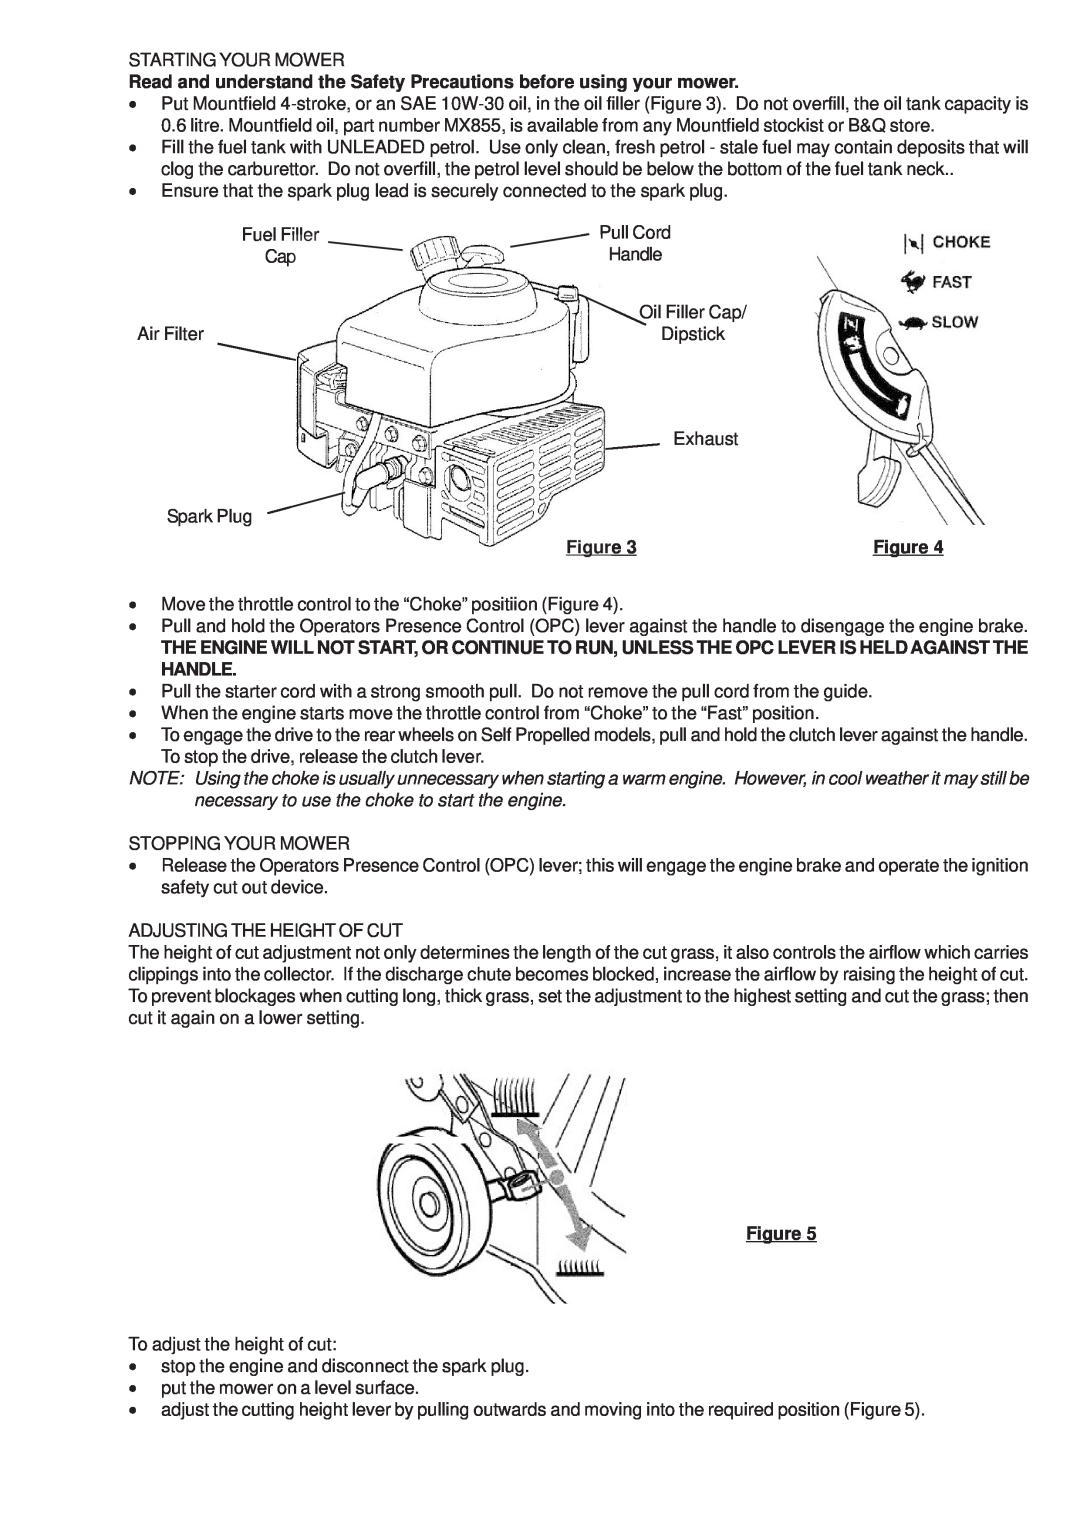 Mountfield SP474 manual Read and understand the Safety Precautions before using your mower 